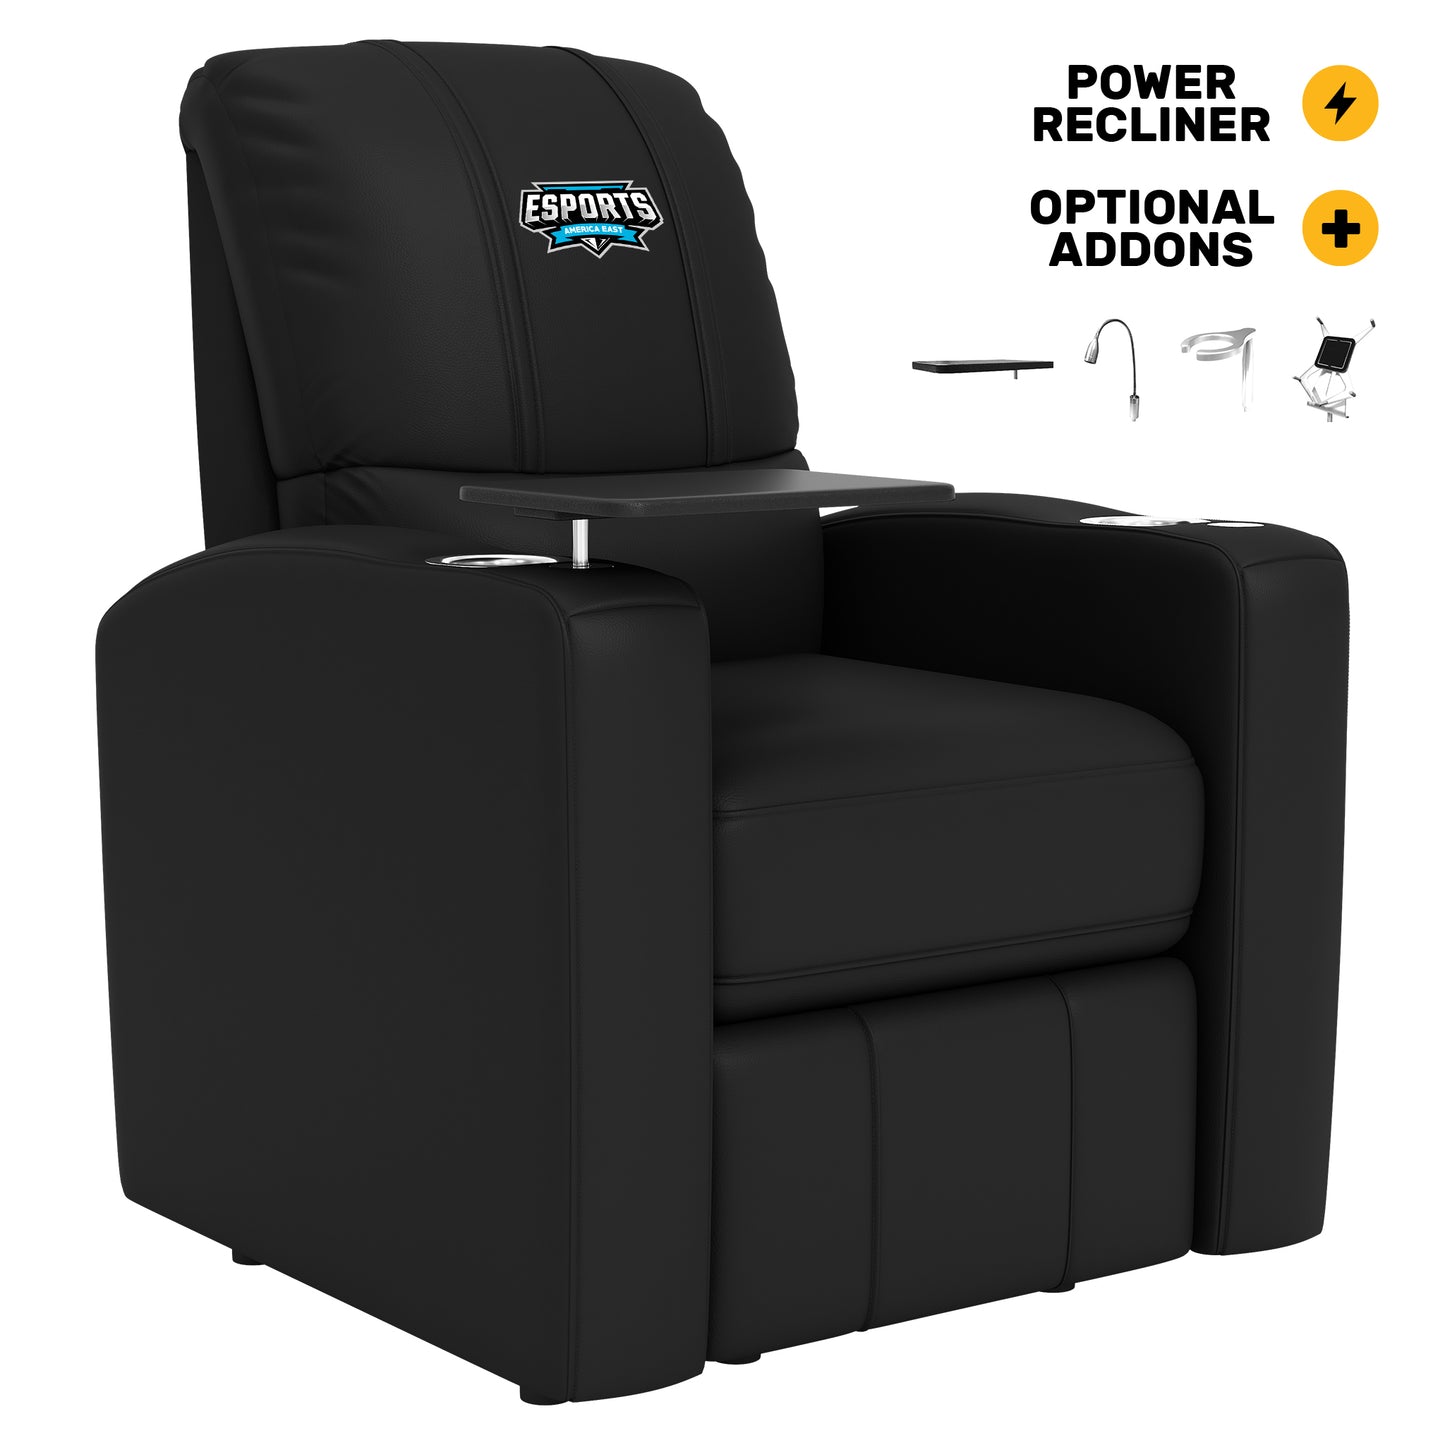 Stealth Power Plus Recliner with American East Esports Conference Logo